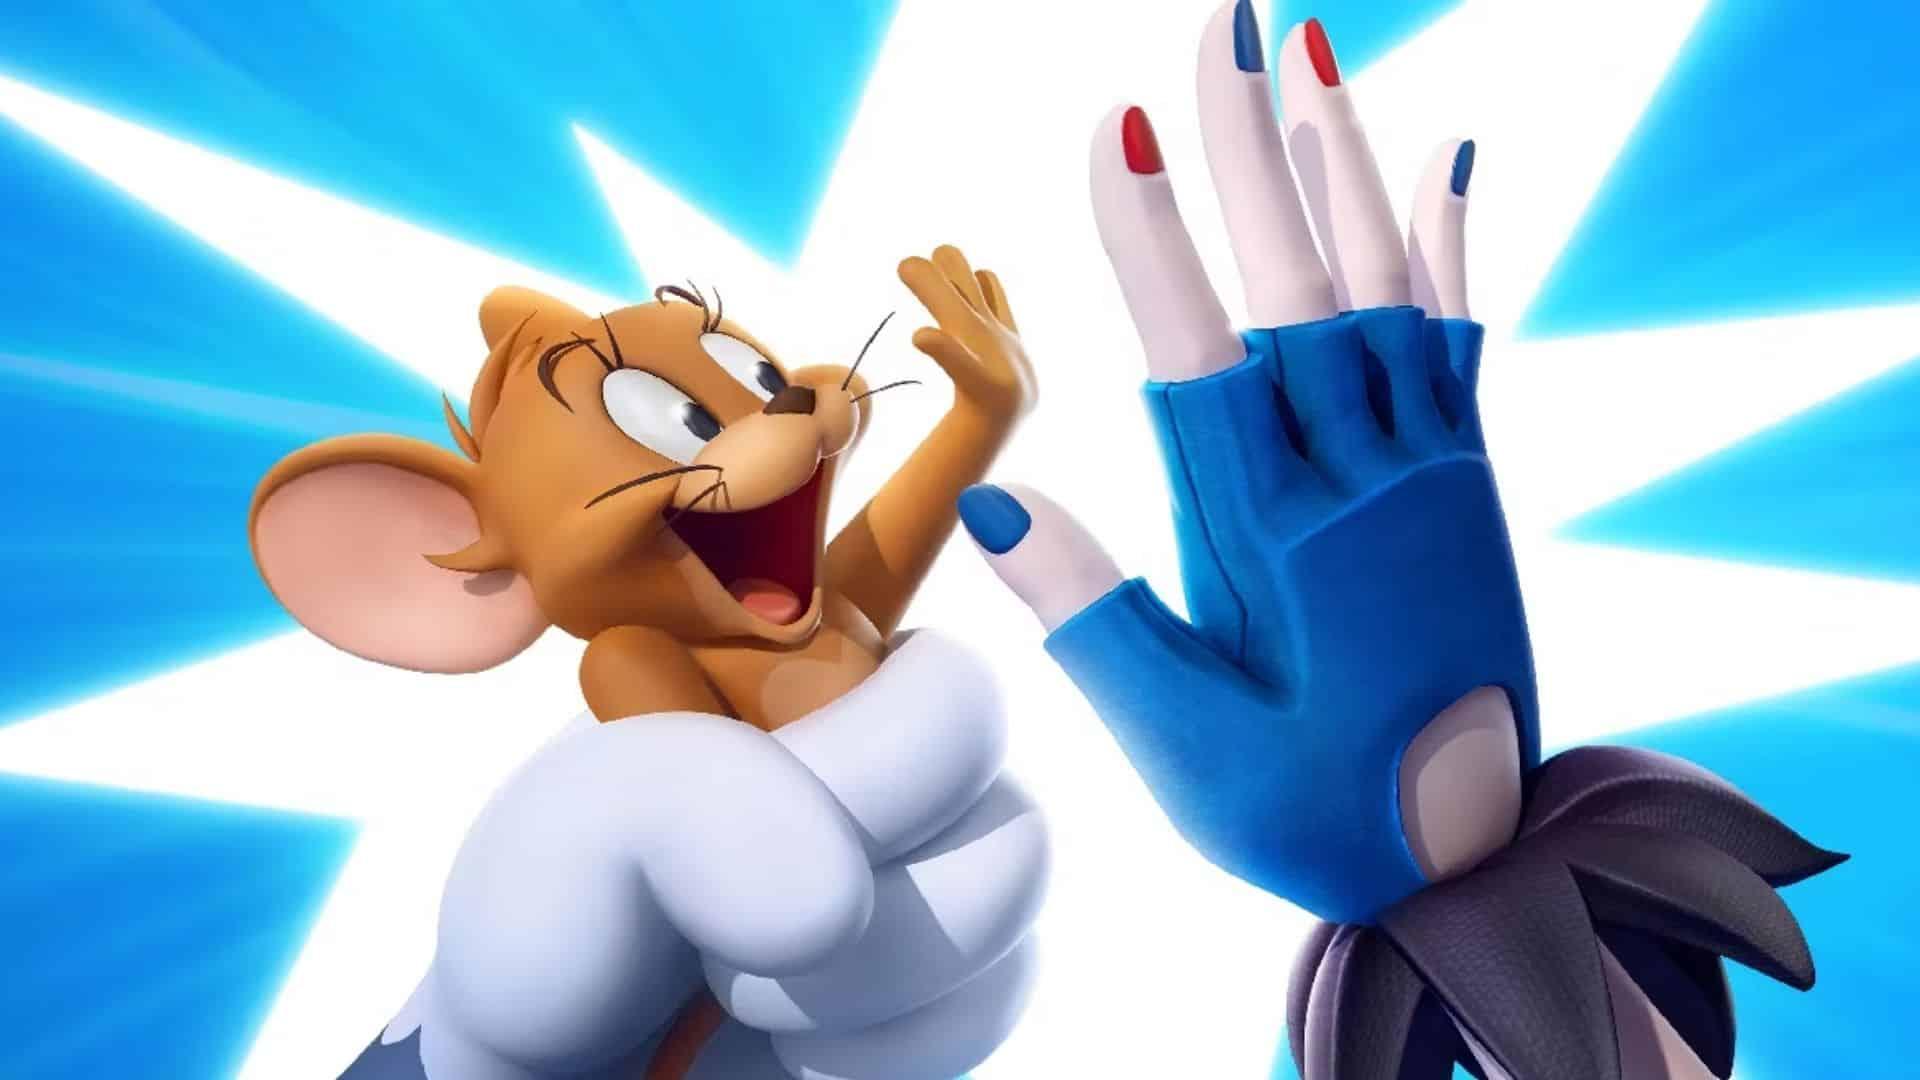 jerry high fiving harley quinn in multiversus